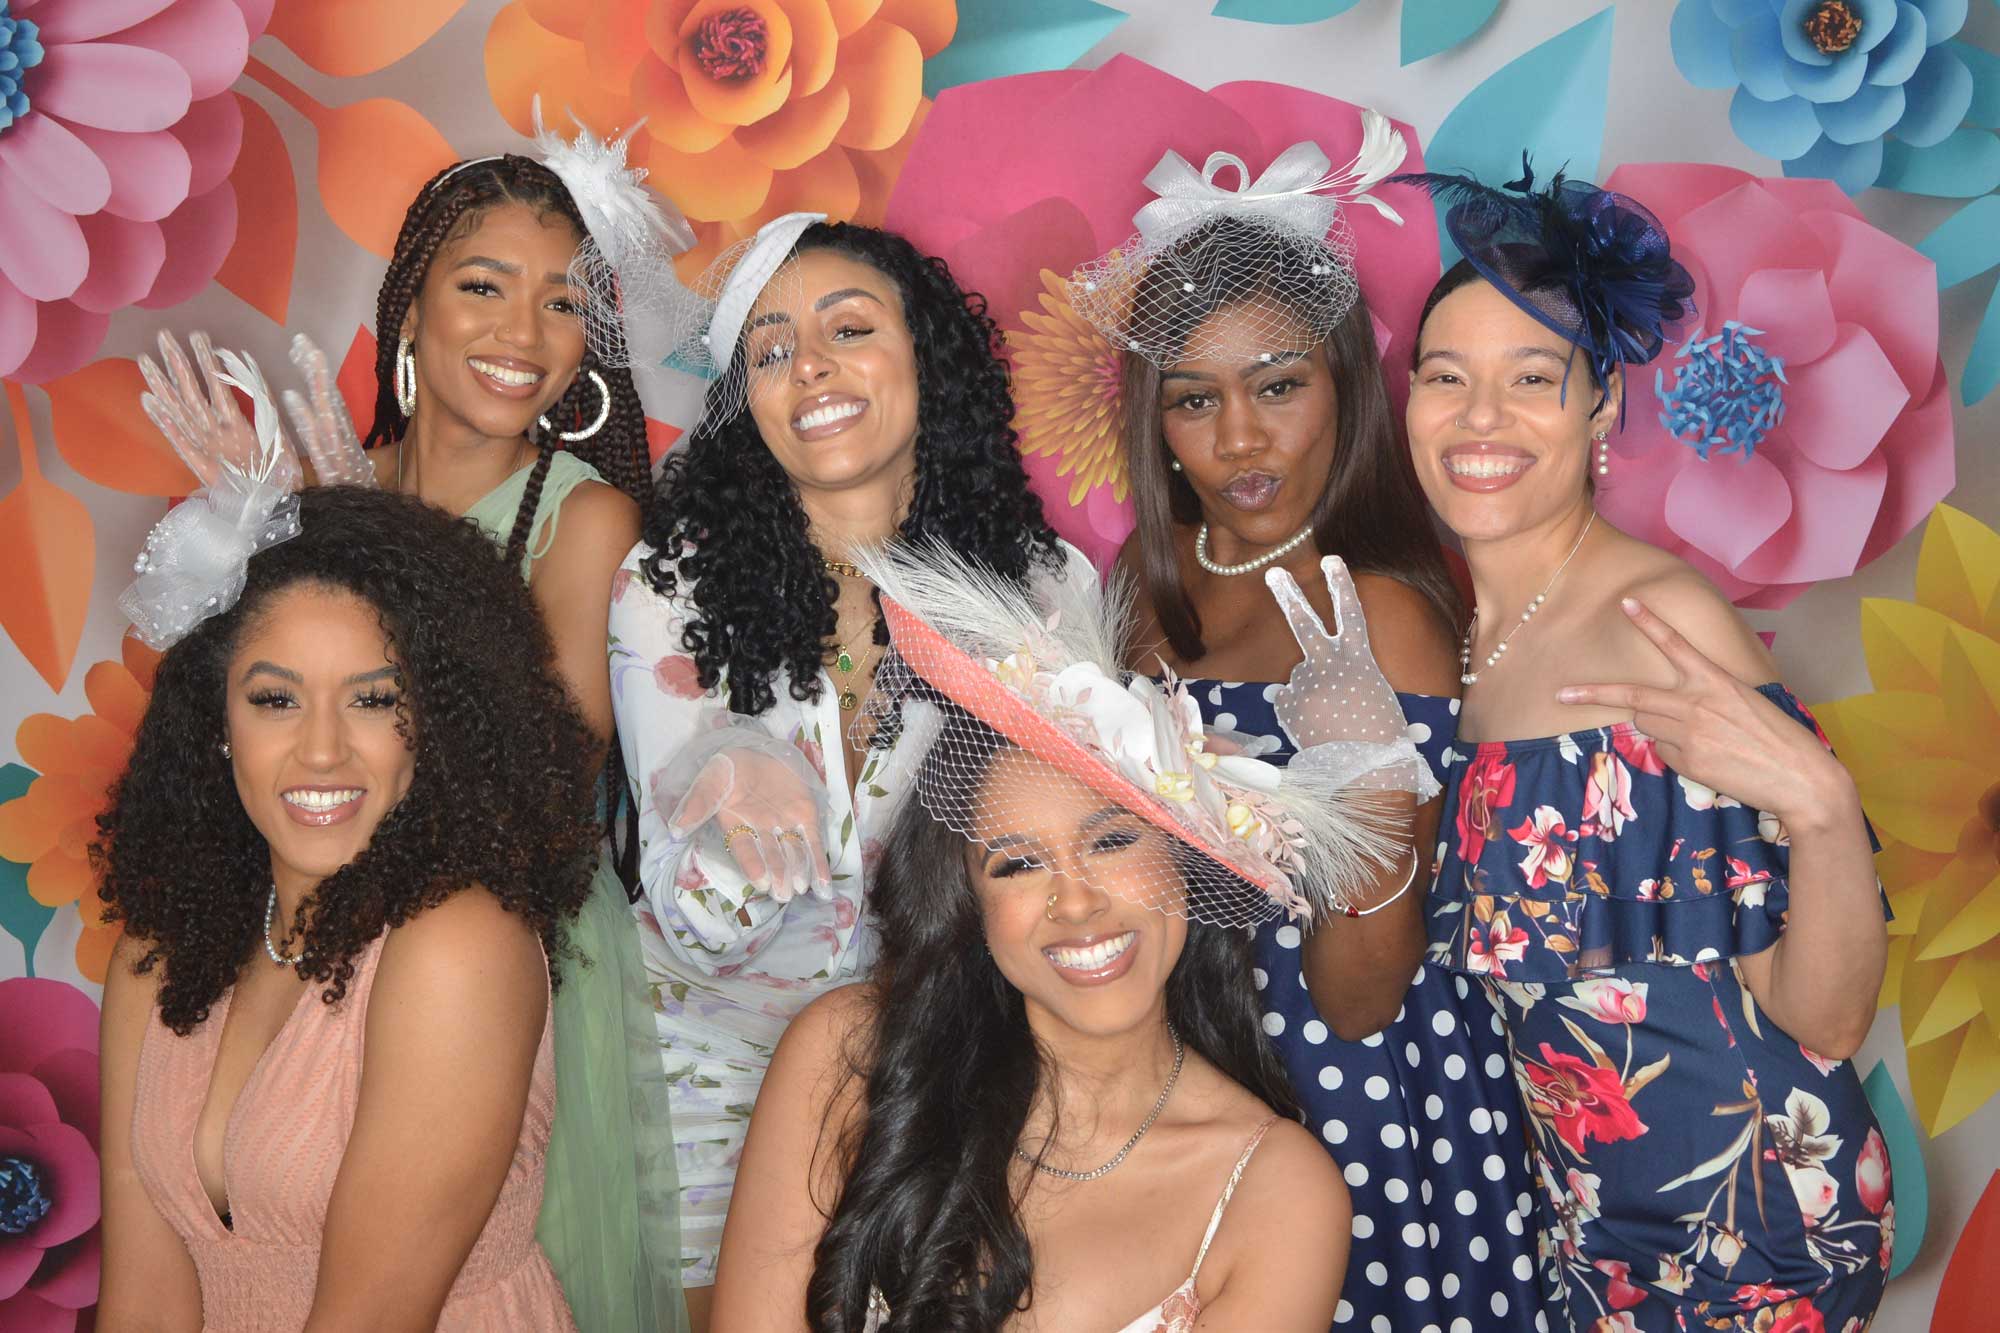 A group of joyful women dressed in festive attire with floral hats posing together in front of a colorful flower backdrop.